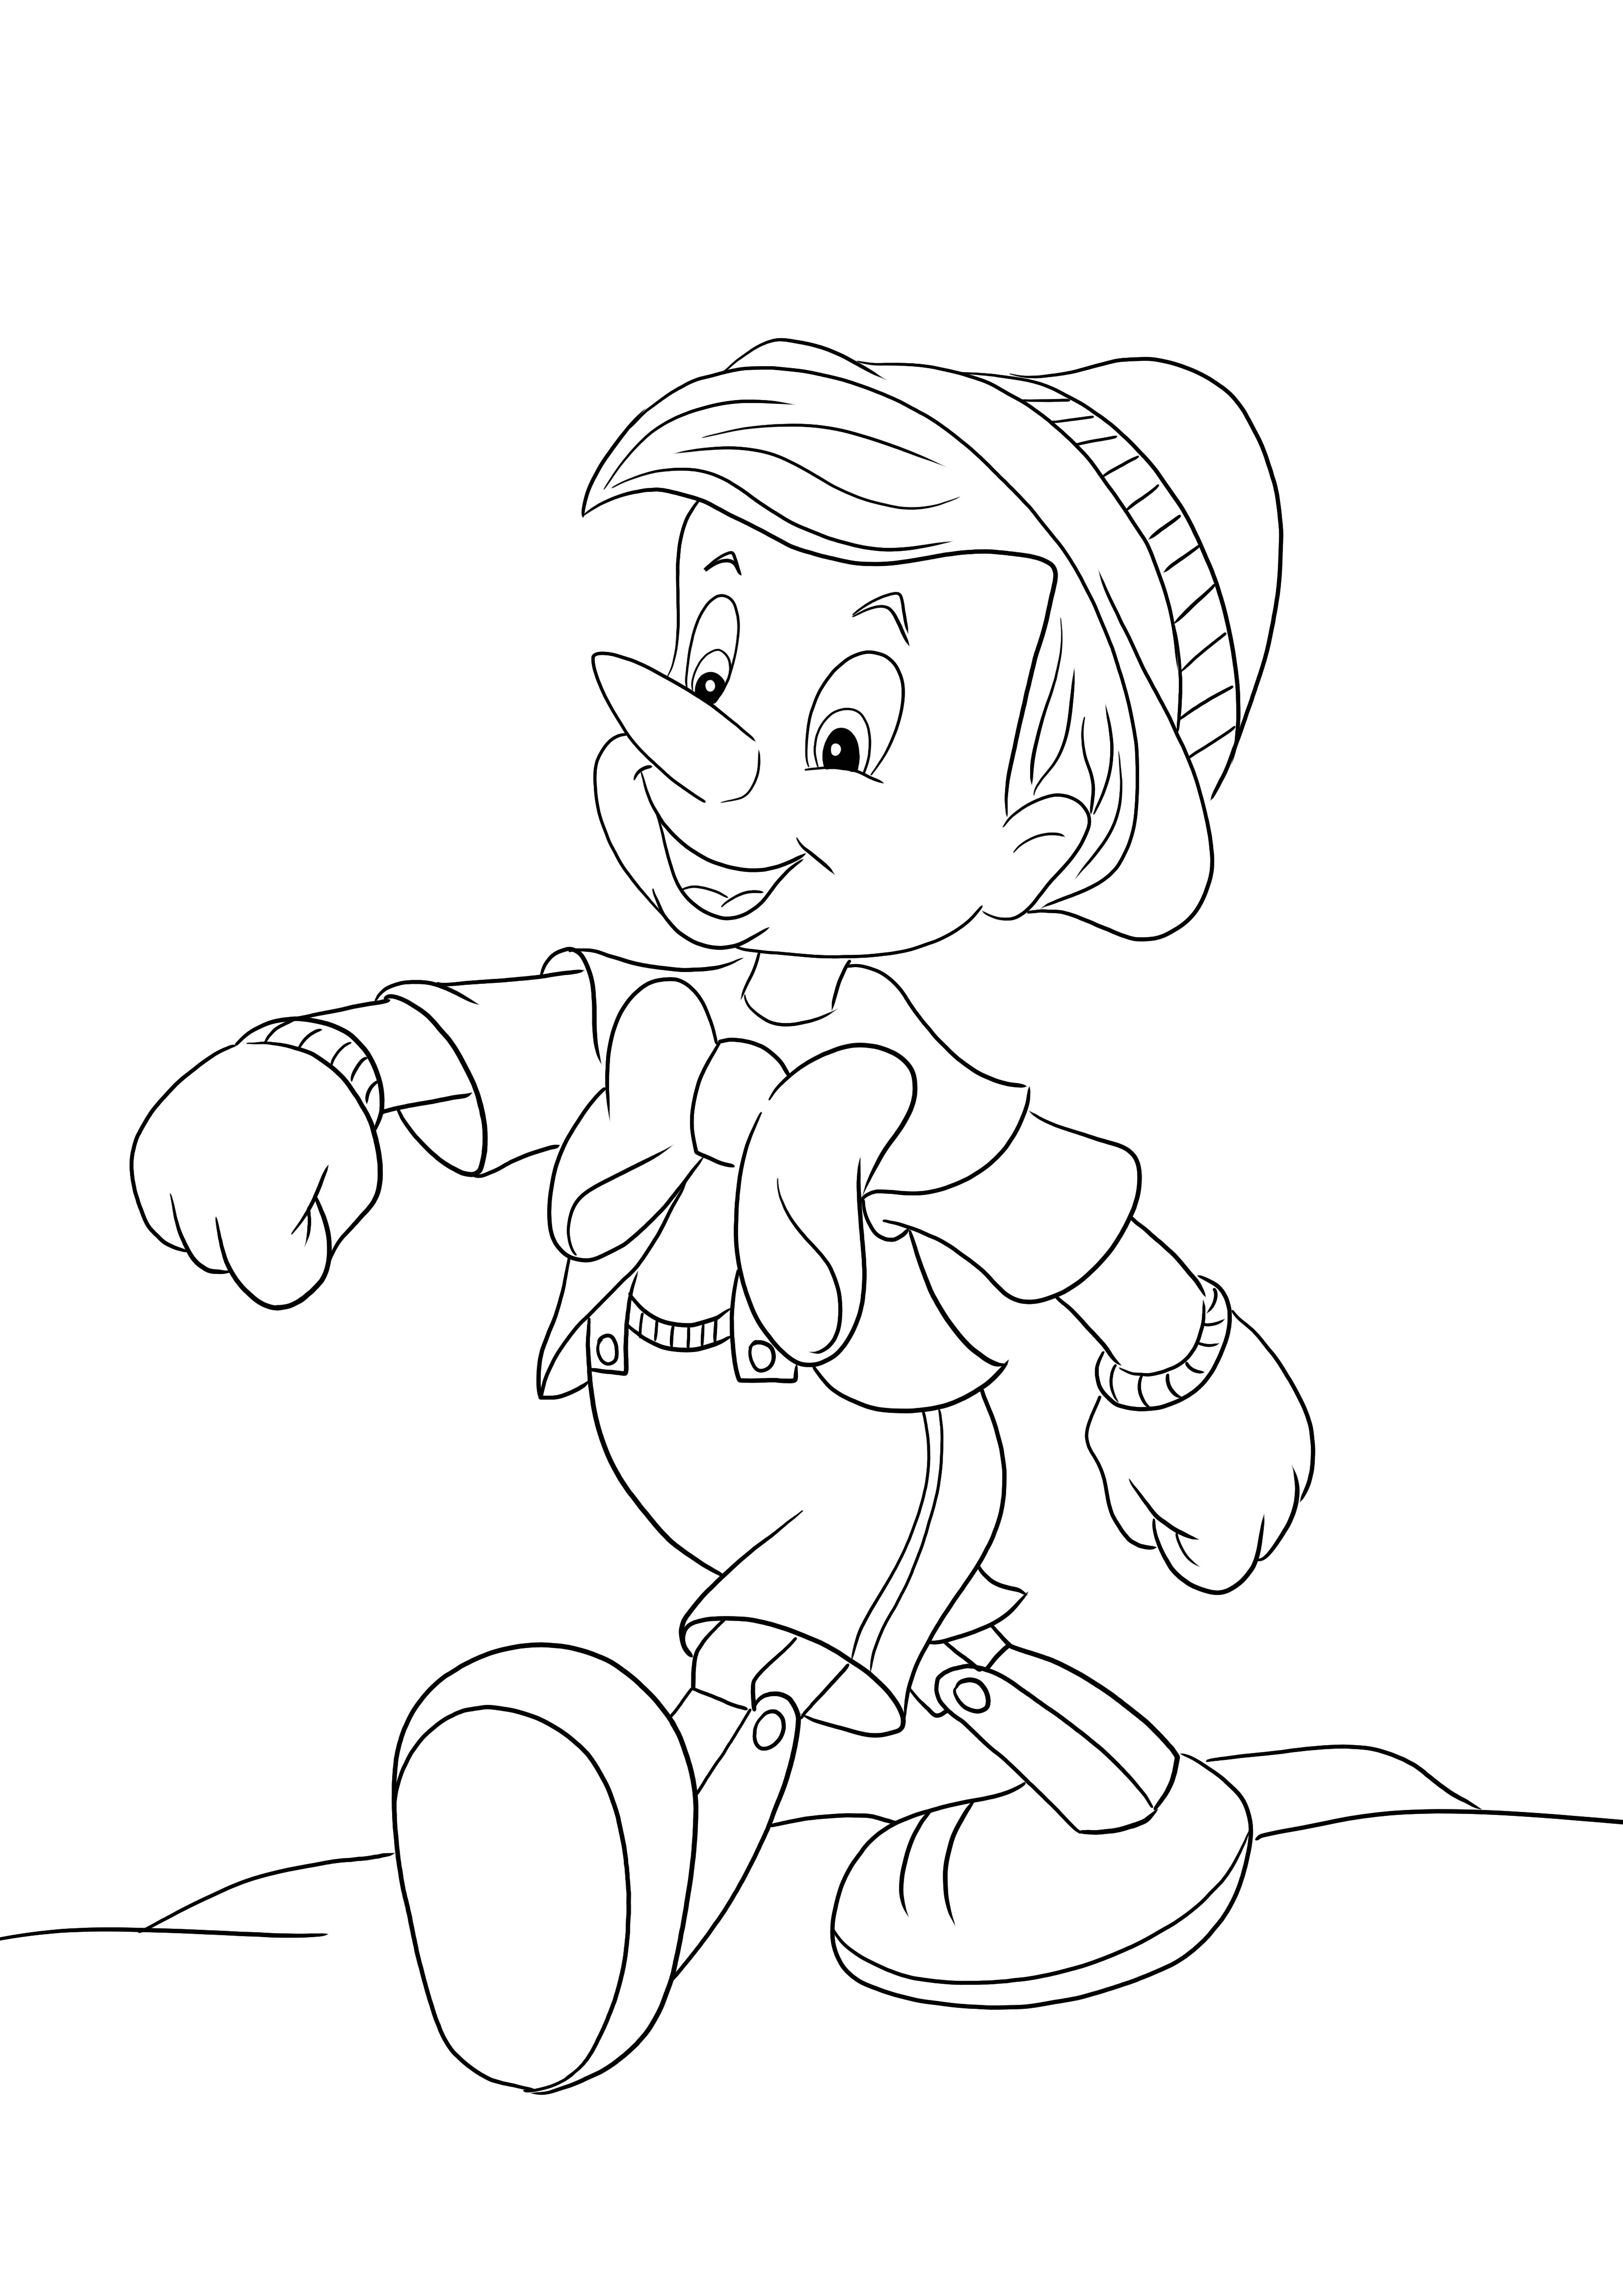 Pinocchio walking proudly coloring page-ready to be downloaded and colored